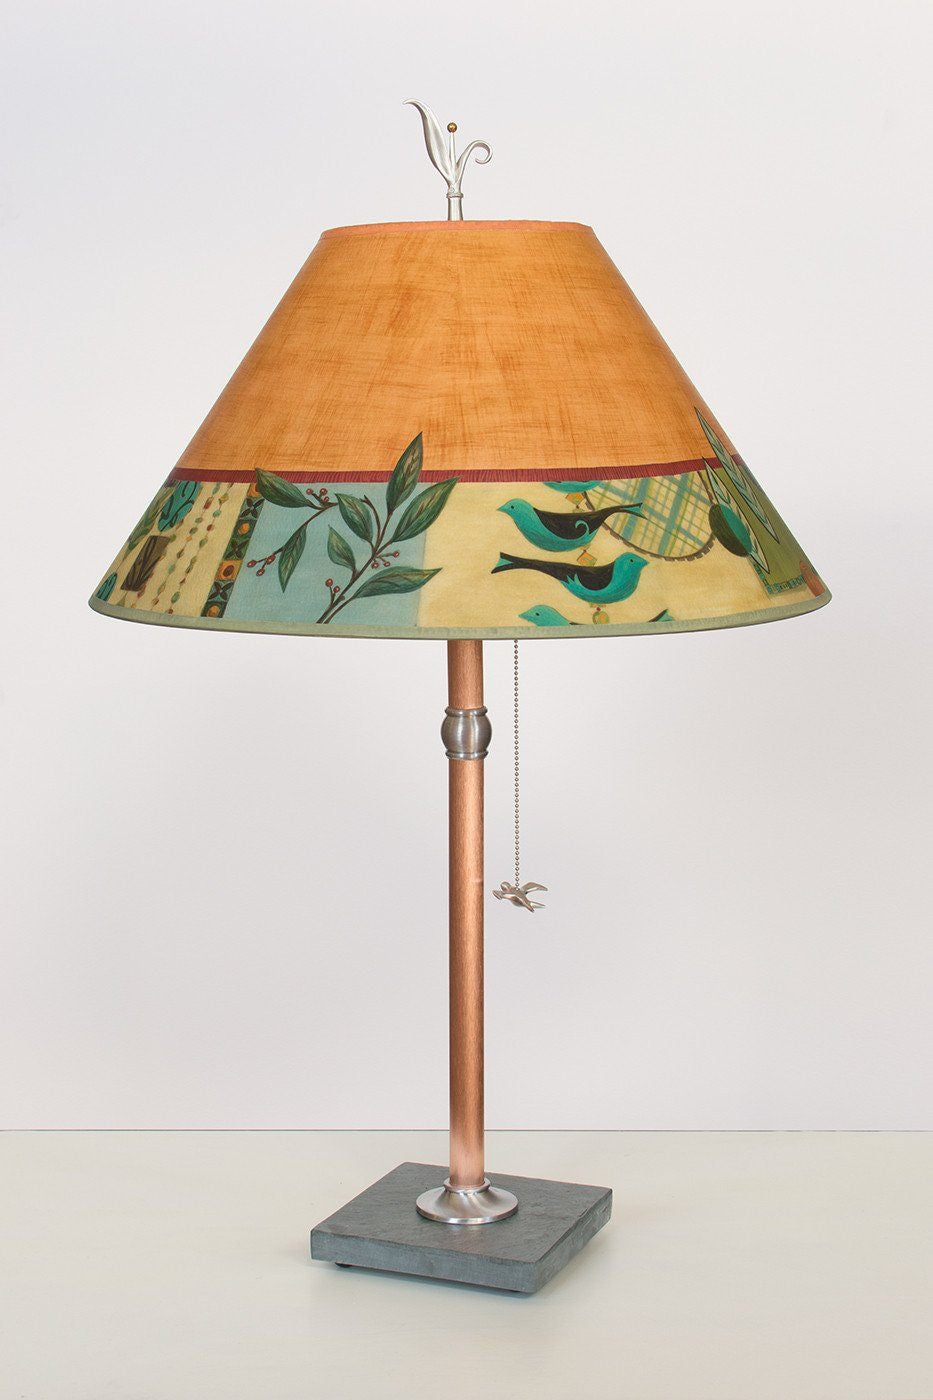 Copper Table Lamp on Vermont Slate with Large Conical Shade in New Capri Spice